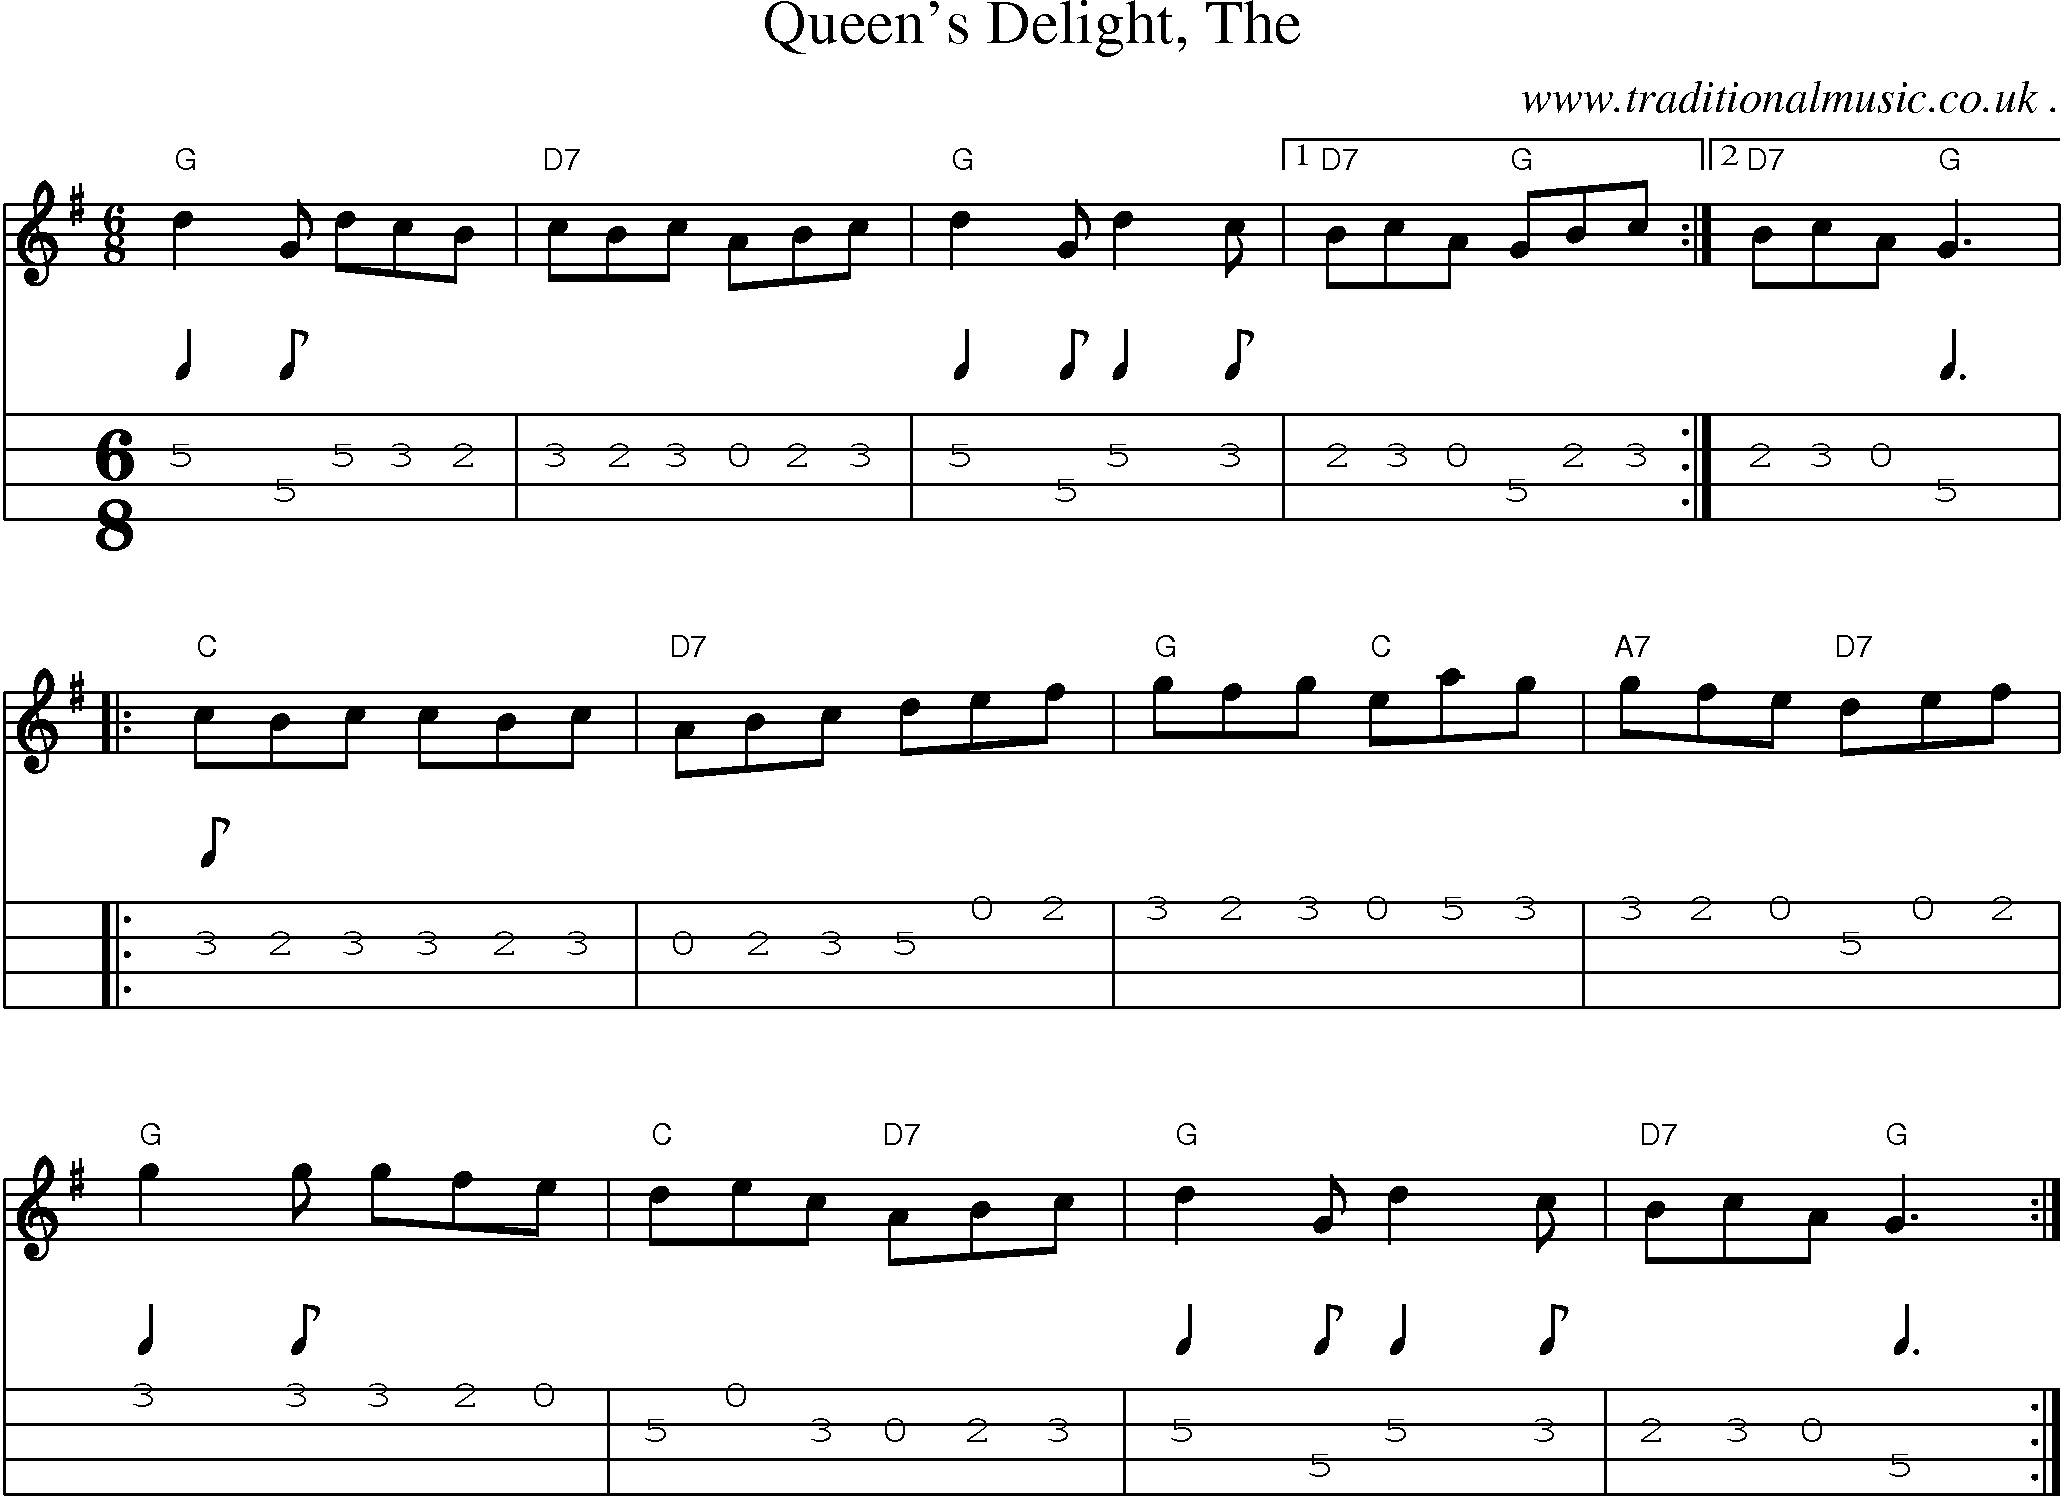 Music Score and Guitar Tabs for Queens Delight The